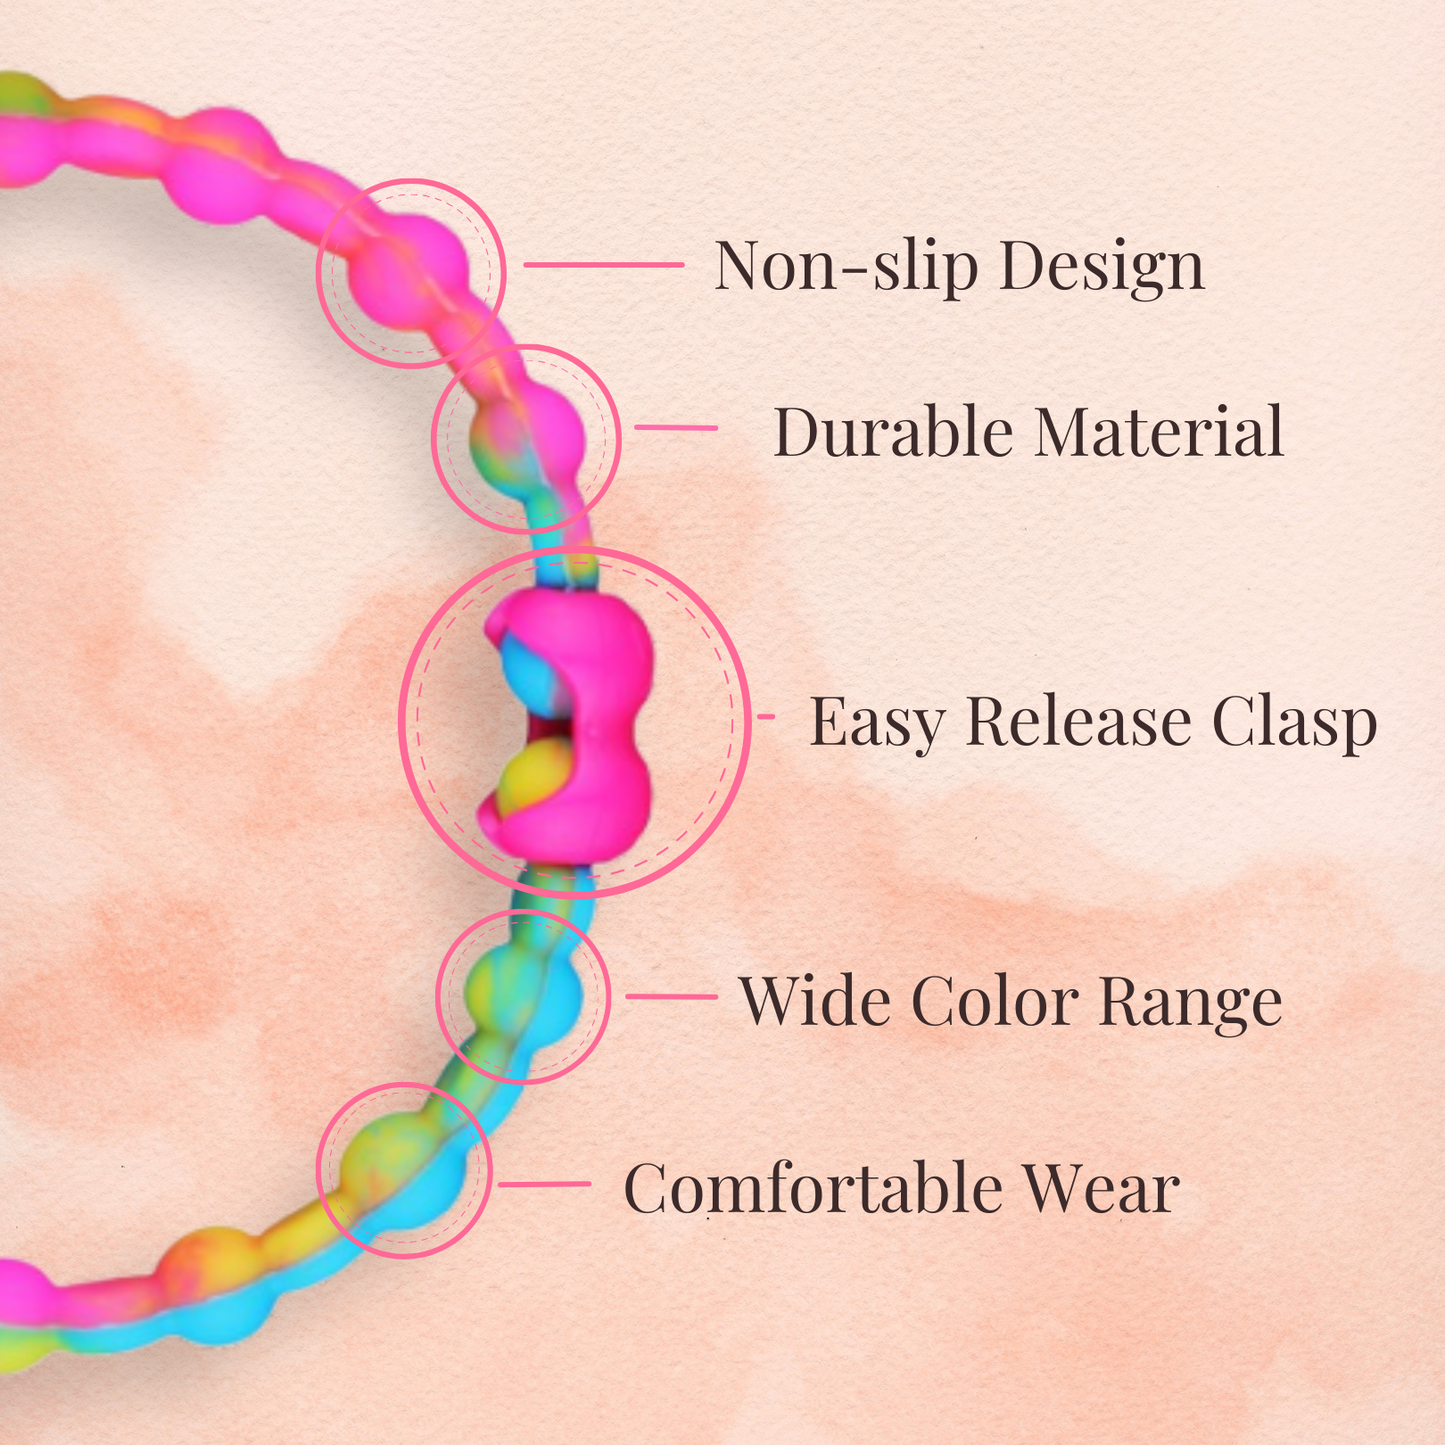 Sunrise Serenity Pack Hair Ties (8 Pack): Wash Your Hair in Soft Morning Light